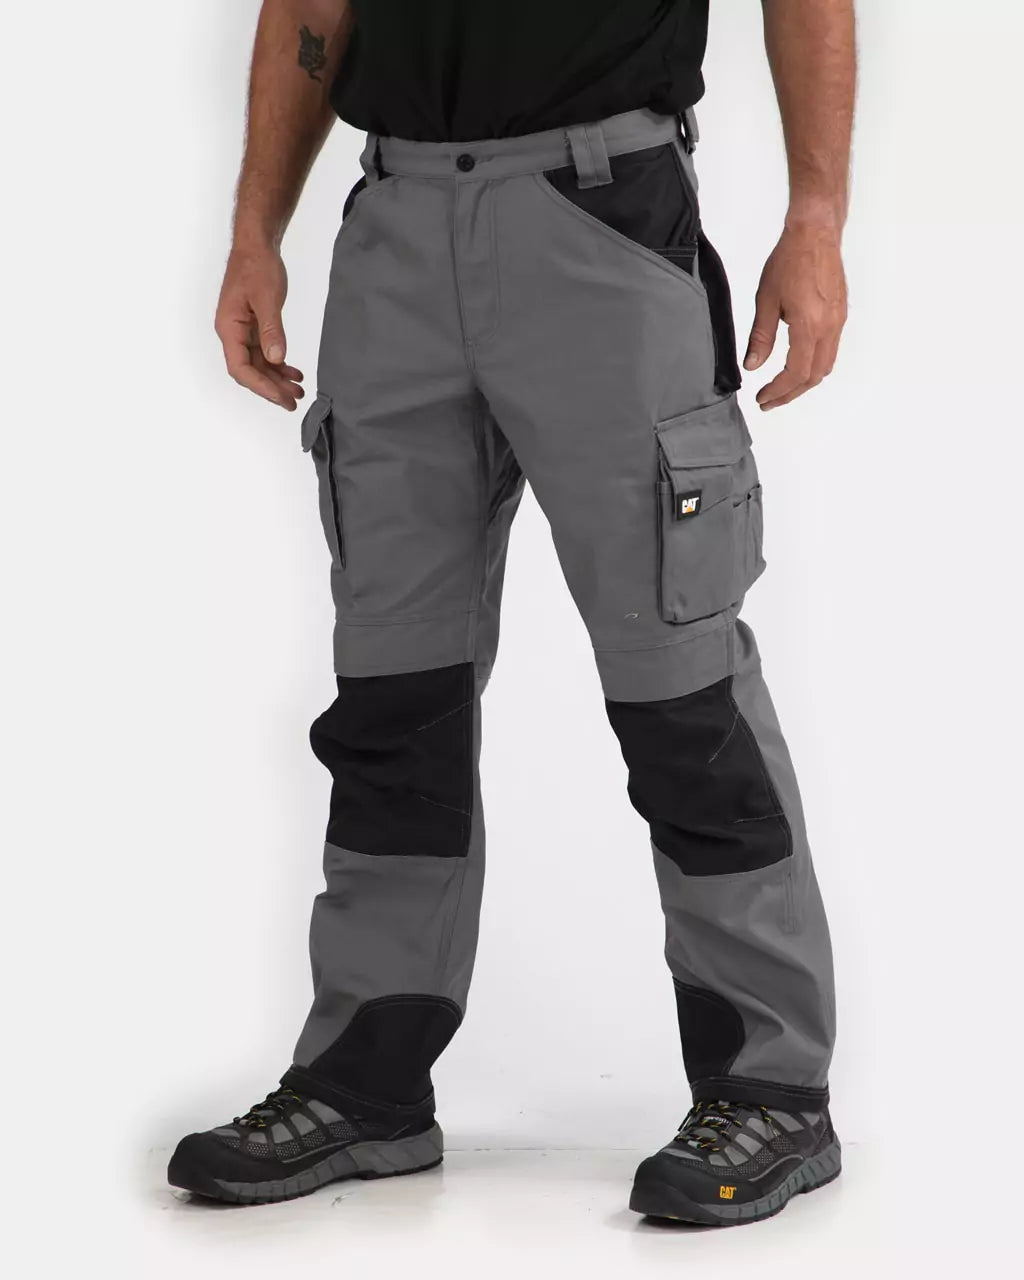 PRODUCT REVIEW: Caterpillar Trademark Trouser Work Pants — Dave's